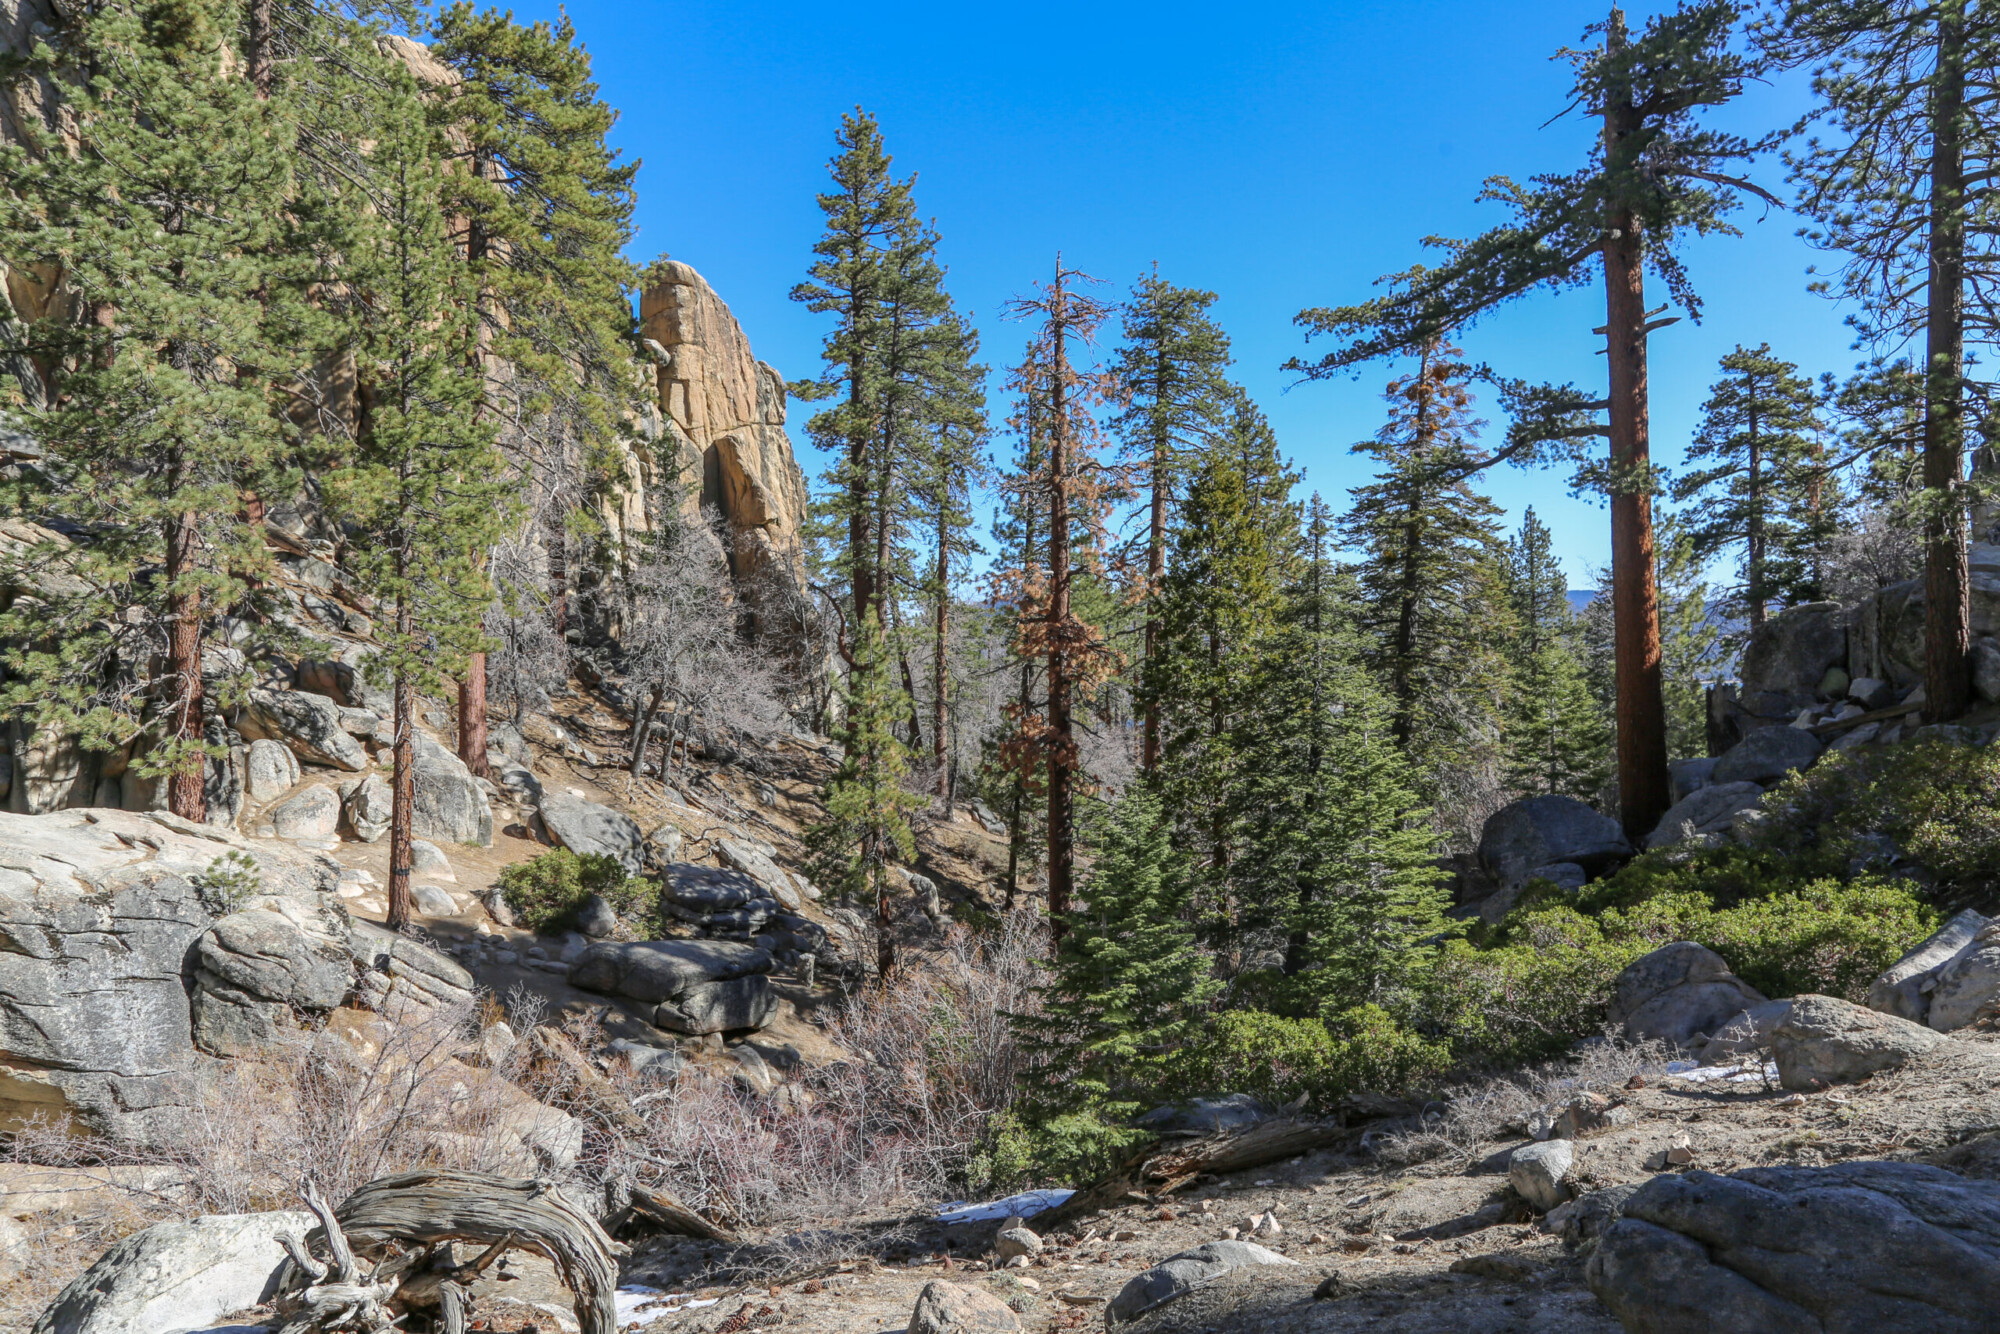 View from Castle Rock Trail of rocky landscape and conifer trees near Big Bear, California.